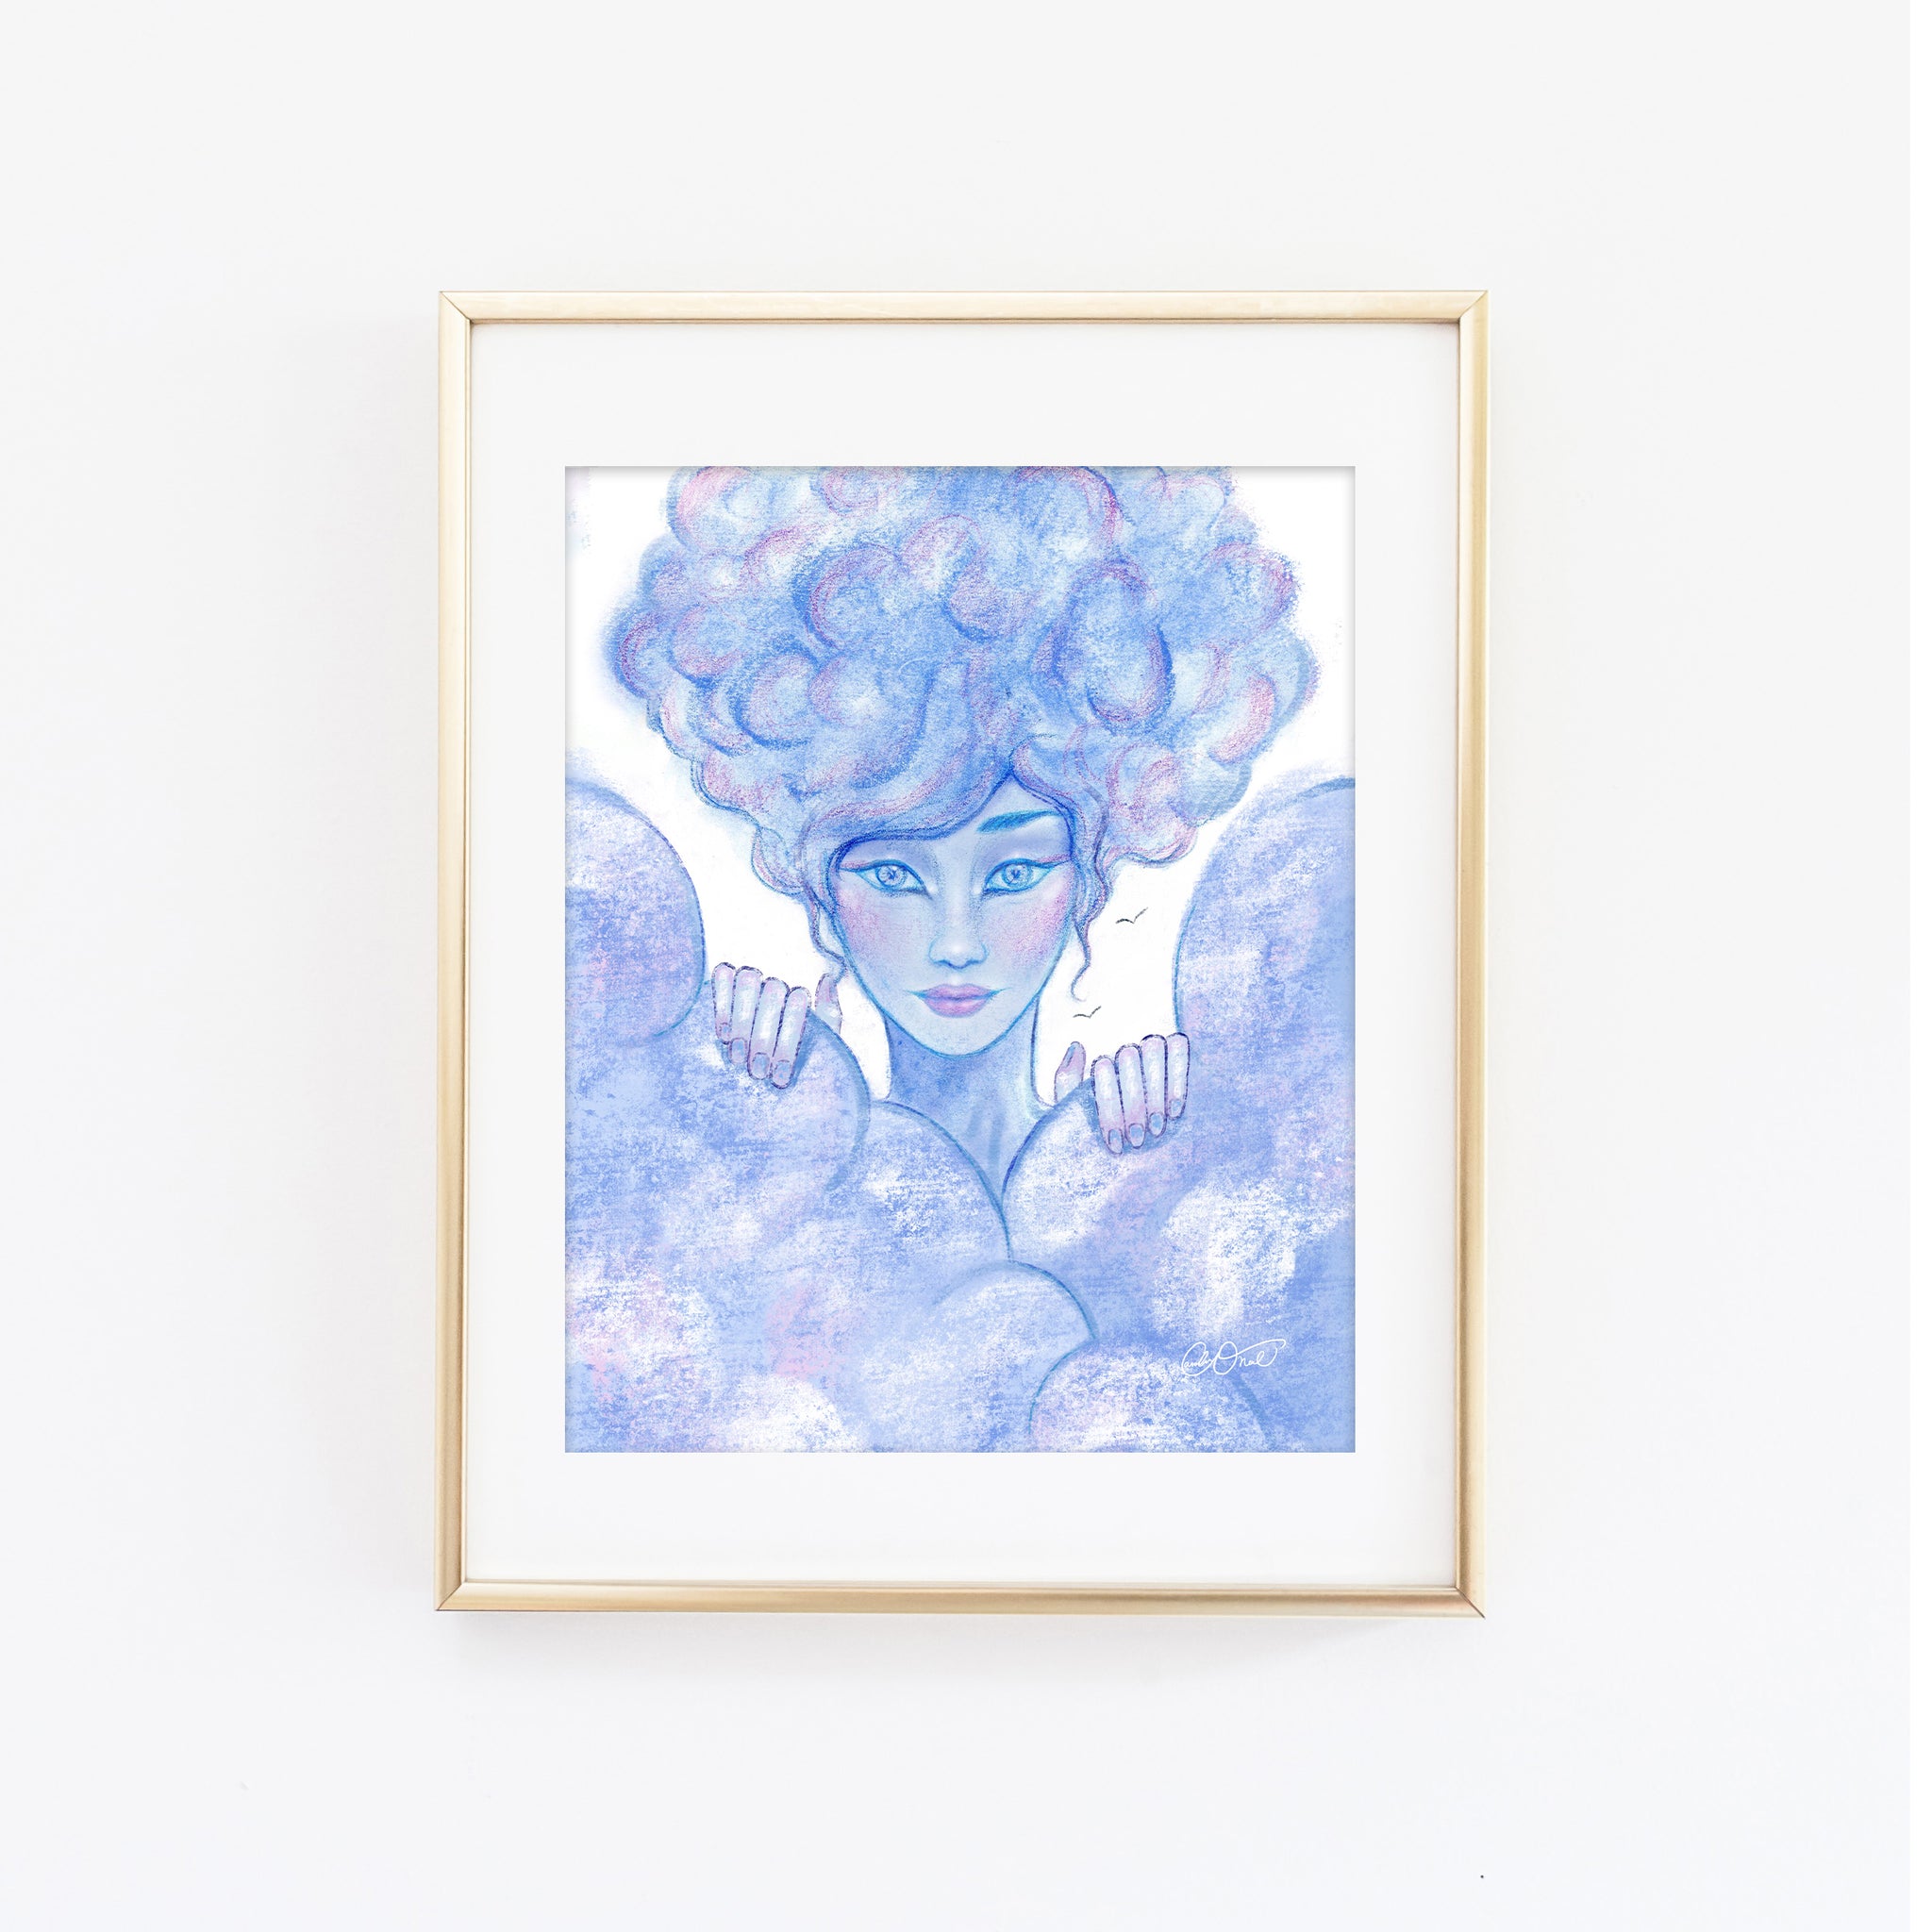 Introverted Cloud Girl Art Print